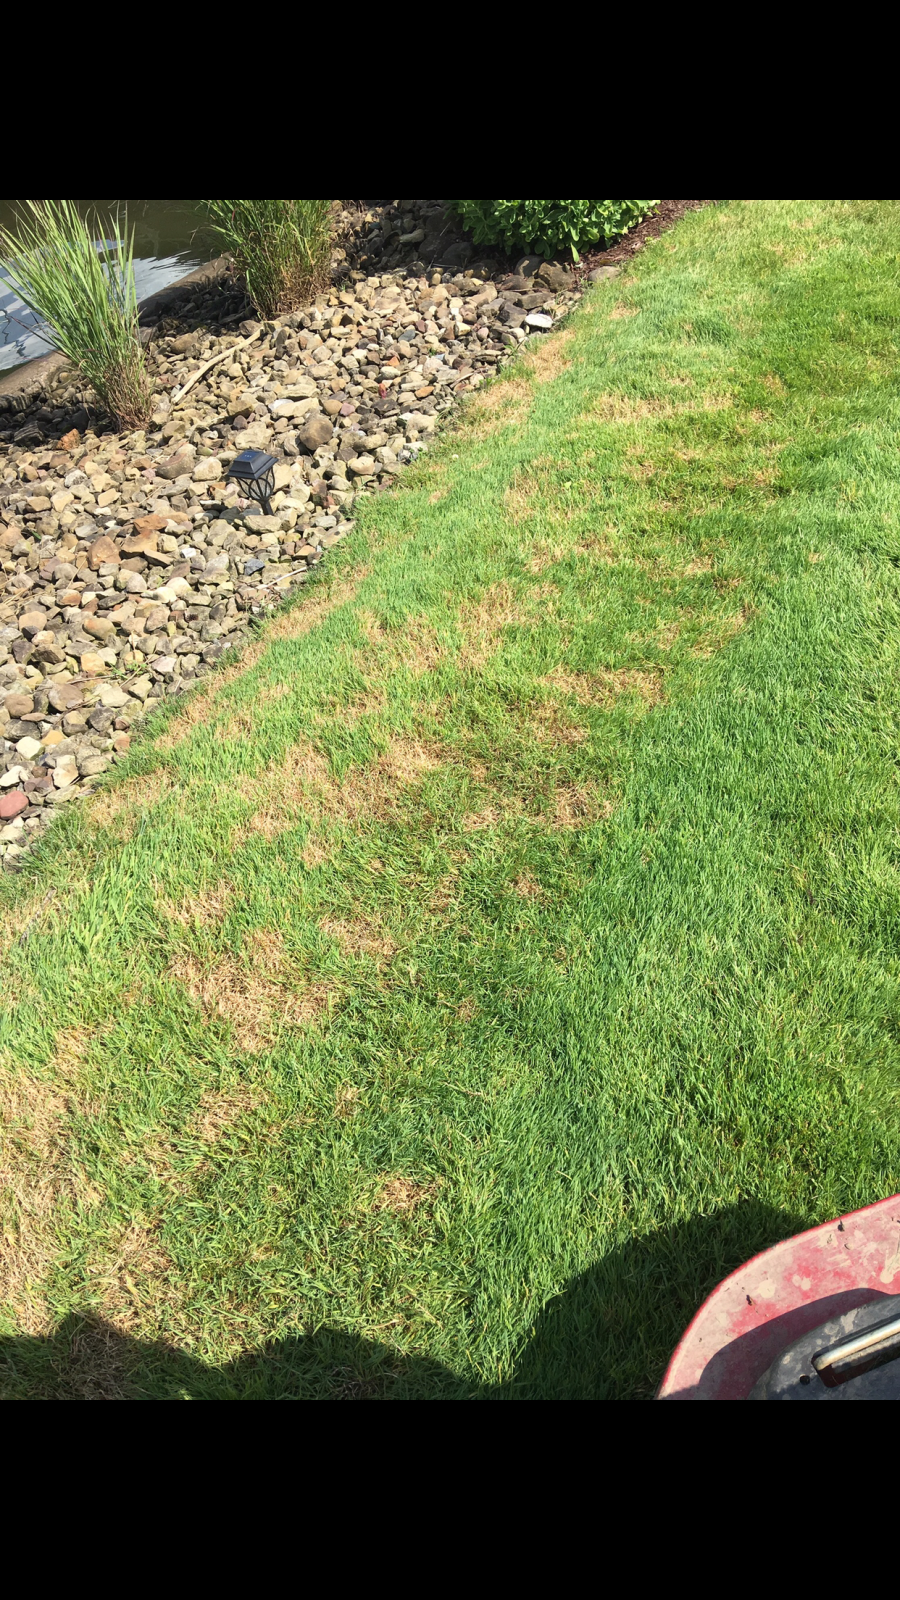 Identifying and treating lawn disease